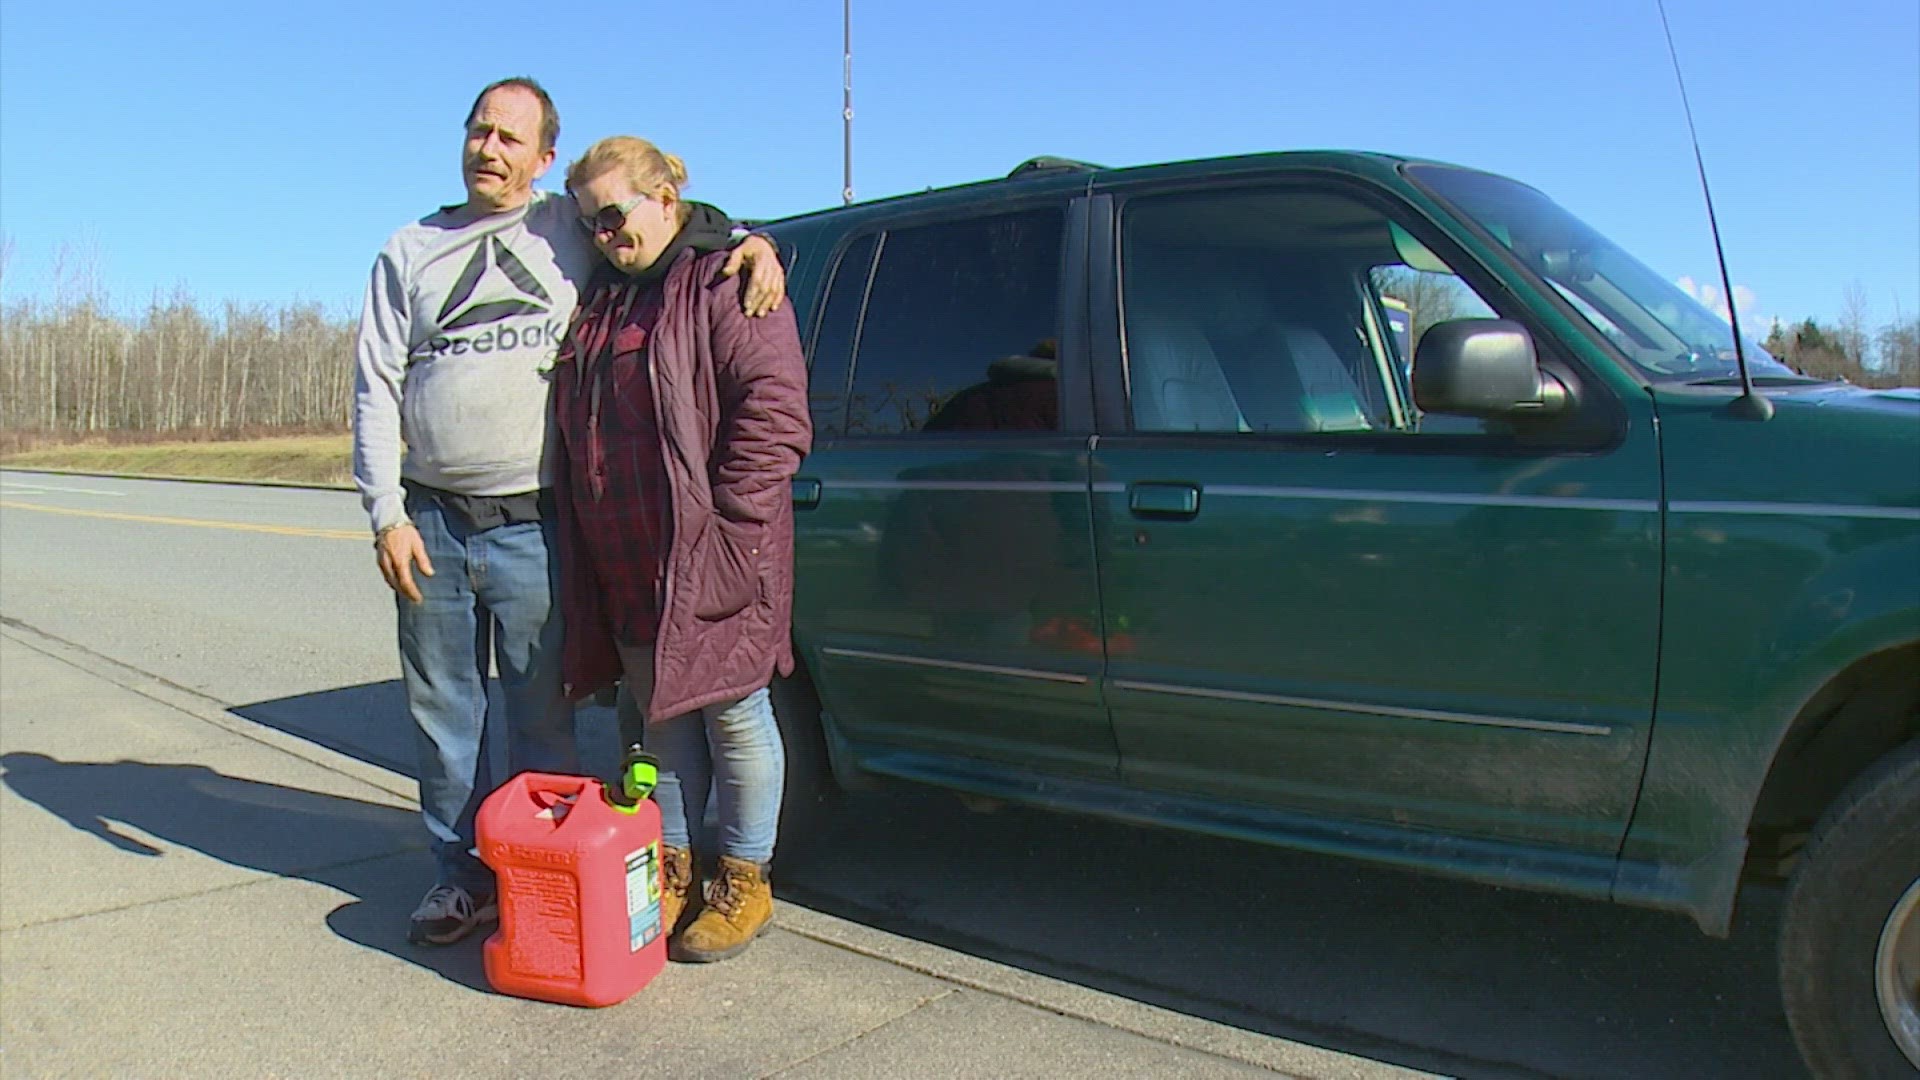 The couple has been living in campgrounds and eating from food banks for weeks.